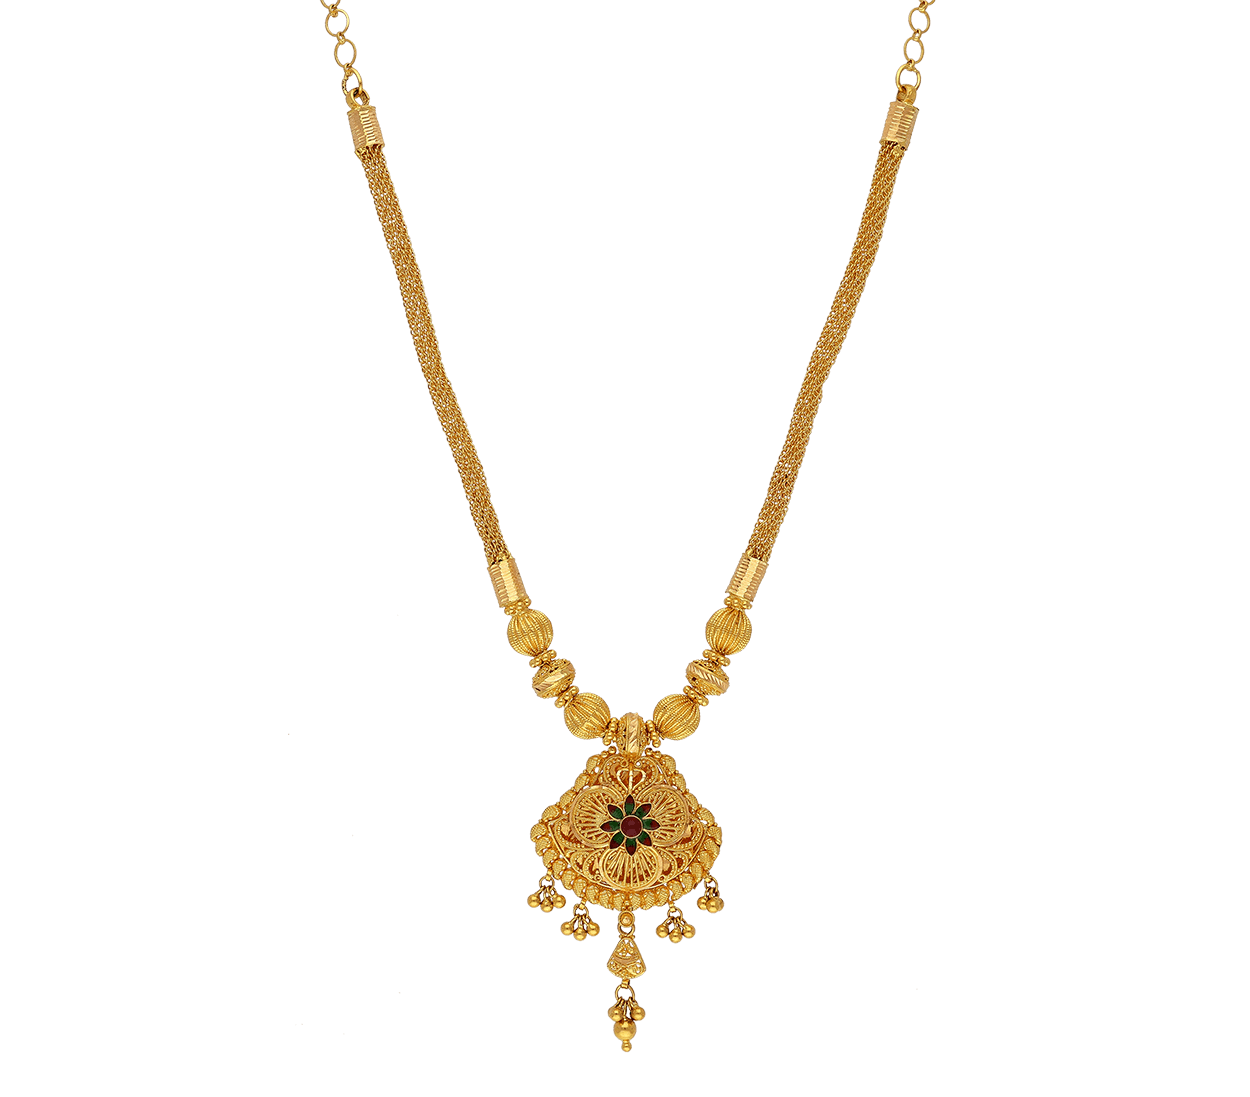 Gold Necklace PNG Photos